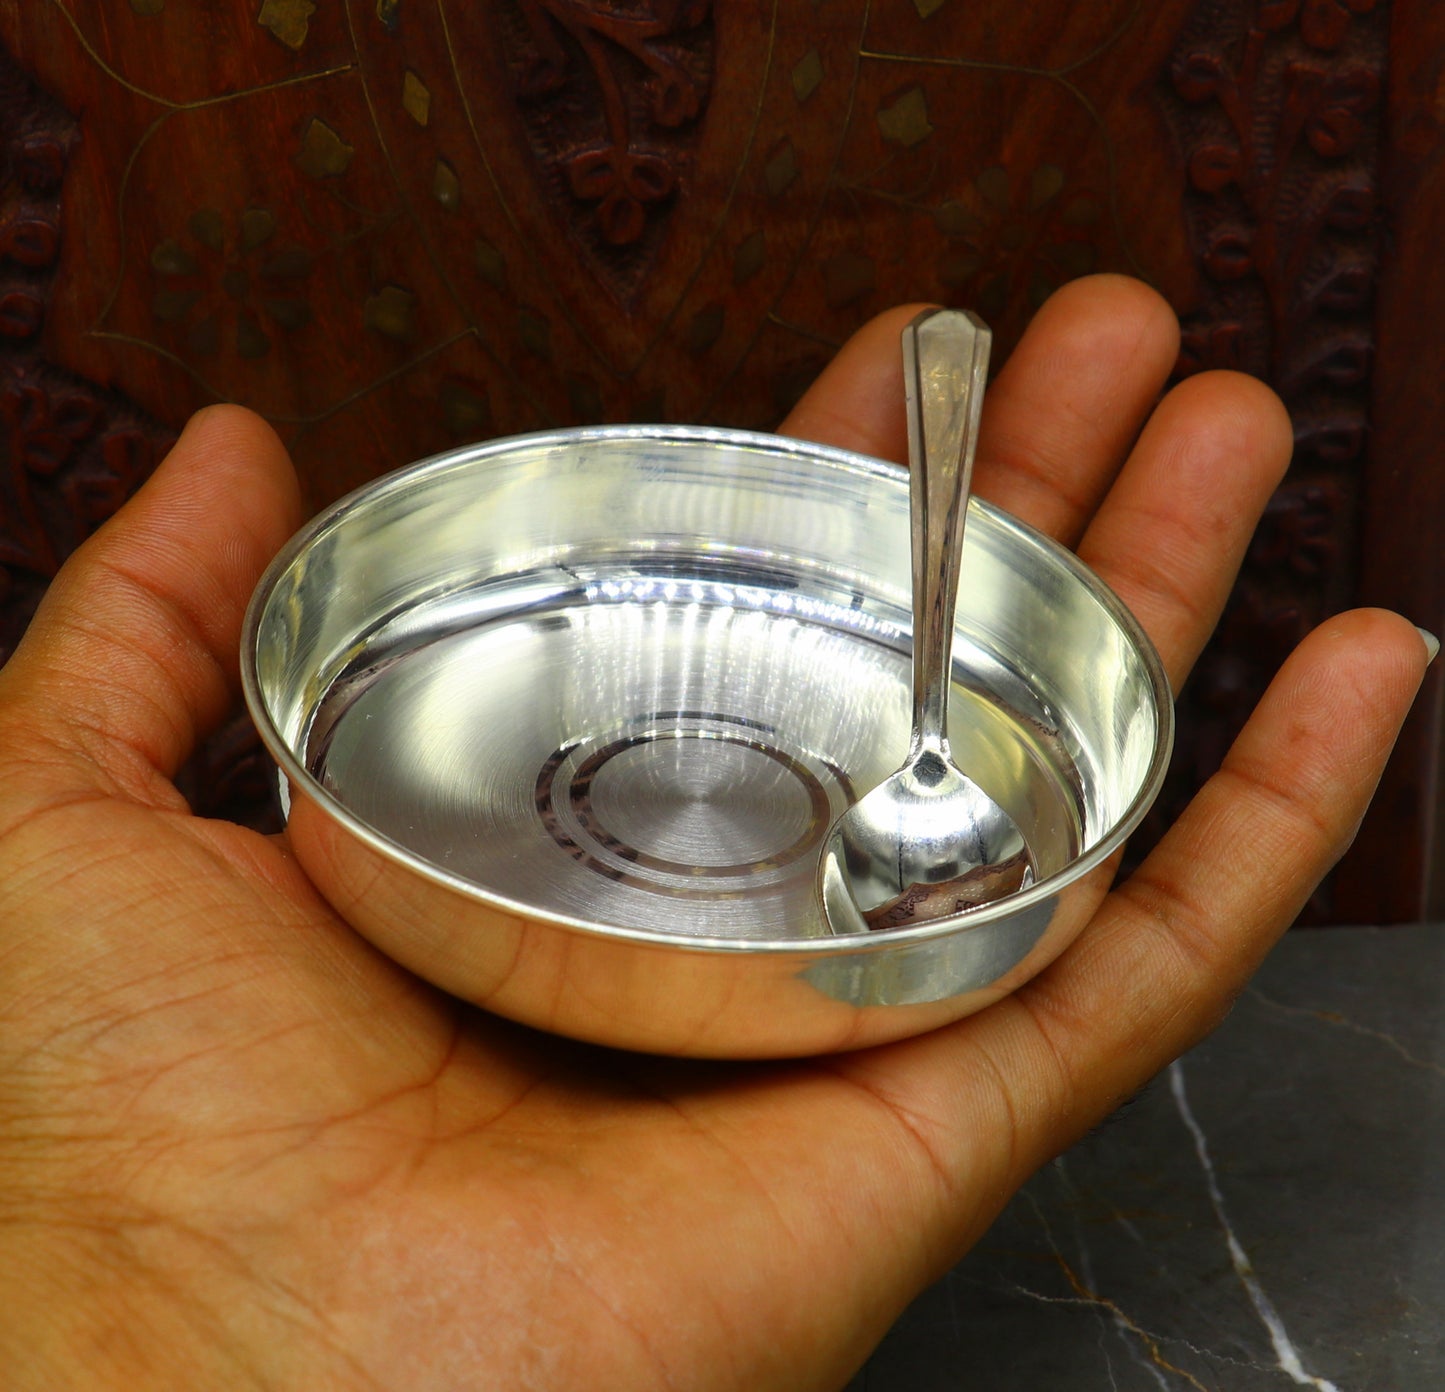 Pure 999 fine silver handmade plate or tray, best baby gifting food serving plate, silver utensils, silver vessel, silver article sv153 - TRIBAL ORNAMENTS